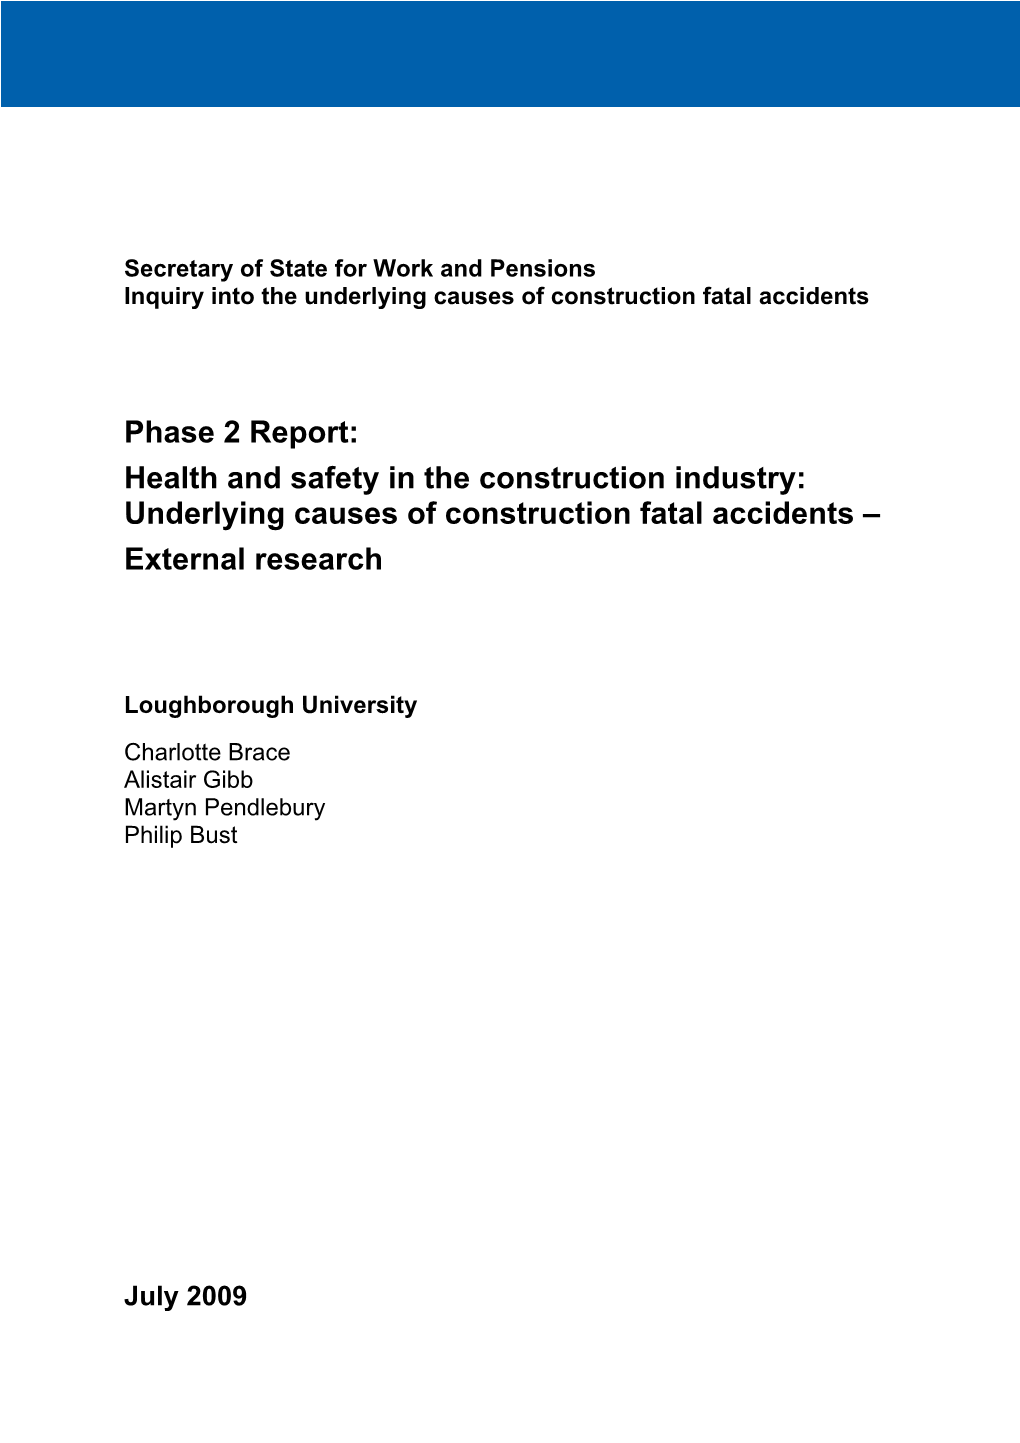 Phase 2 Report: Health and Safety in the Construction Industry: Underlying Causes of Construction Fatal Accidents – External Research